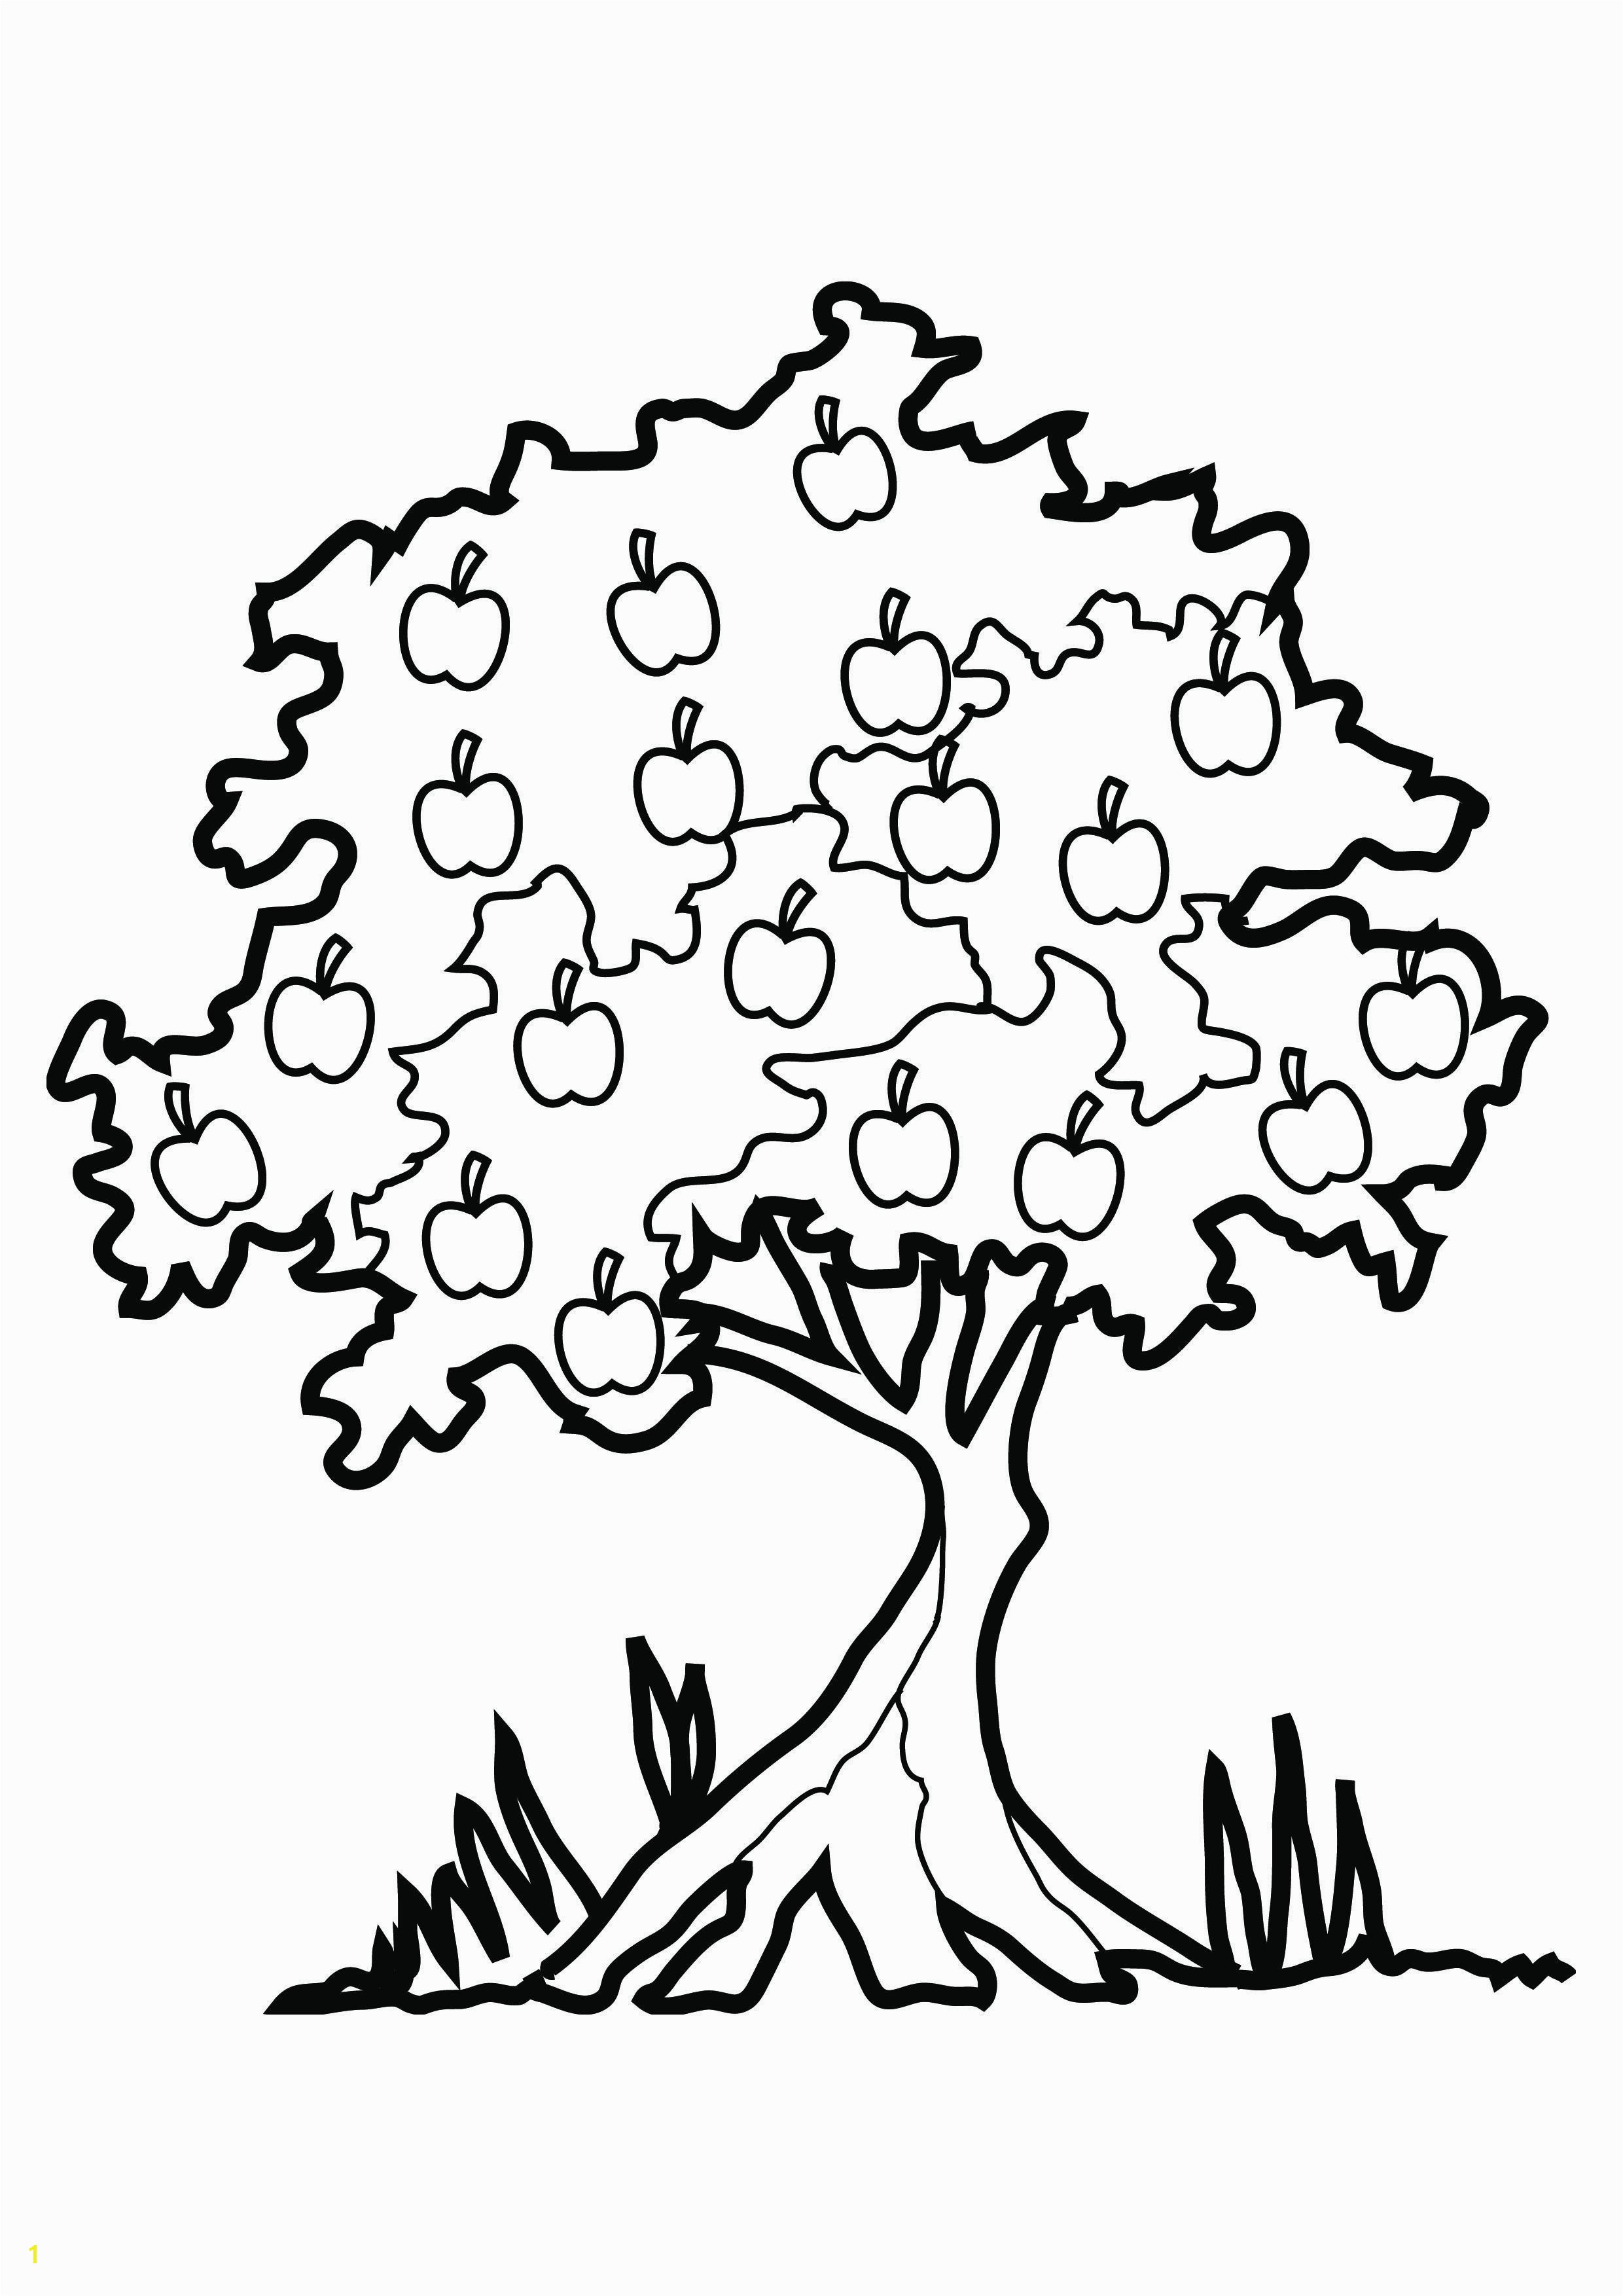 Tree Bark Coloring Pages Tree Bark Coloring Pages New 13 Awesome Hawaii Coloring Pages